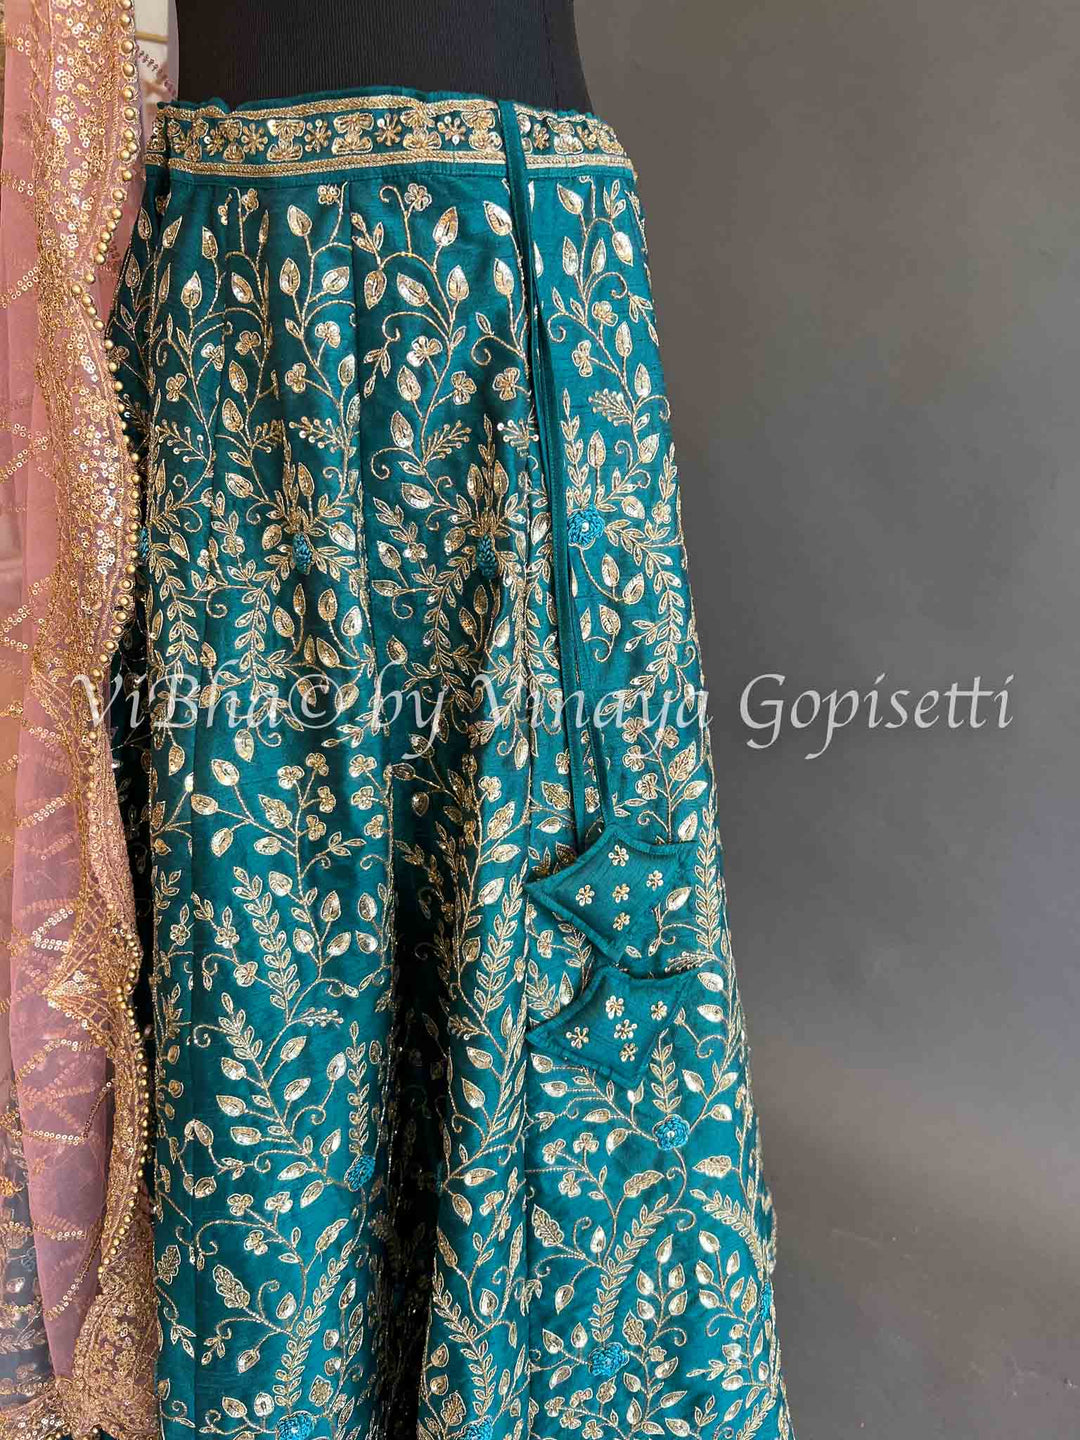 Bridal Lehengas - Deep Teal Lehenga Set With All Over Zari And Gotapatti Embroidery With Contrast Light Pink Embroidered Dupatta